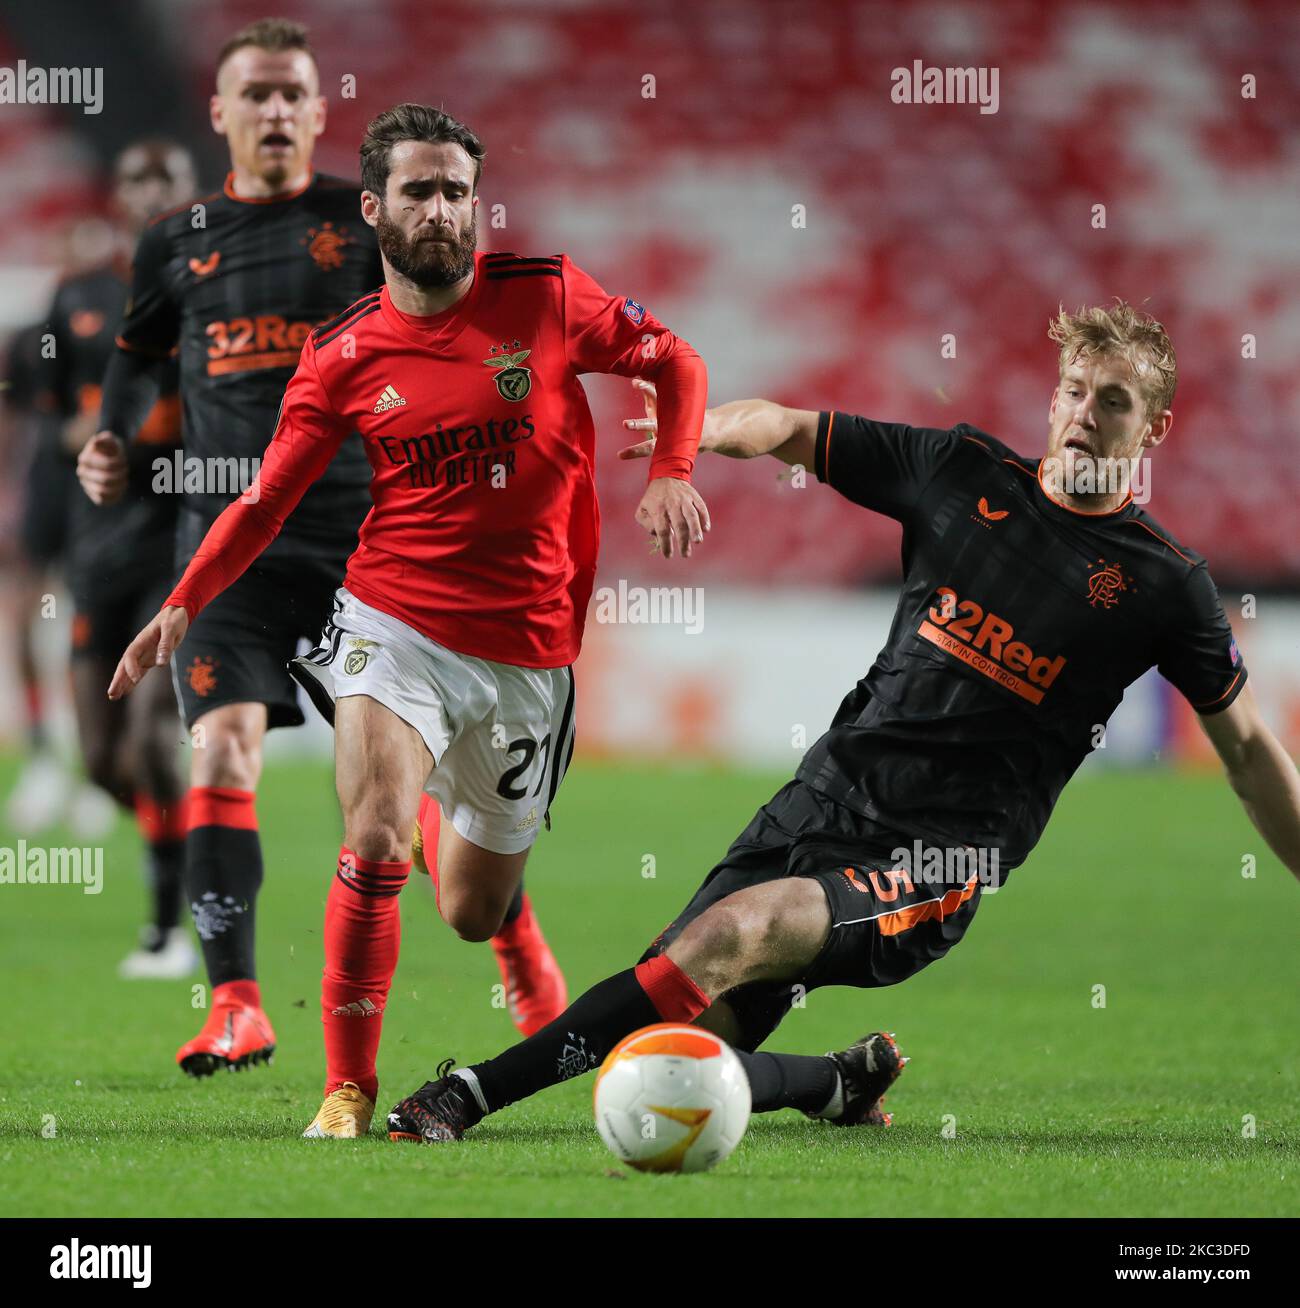 Ryan Jack of Rangers FC in action FC vies Rafa Silva(R) of SL Benfica during the UEFA Europa League Group D stage match between SL Benfica and Rangers FC at Estadio da Luz on November 5, 2020 in Lisbon, Portugal. (Photo by Paulo Nascimento/NurPhoto) Stock Photo